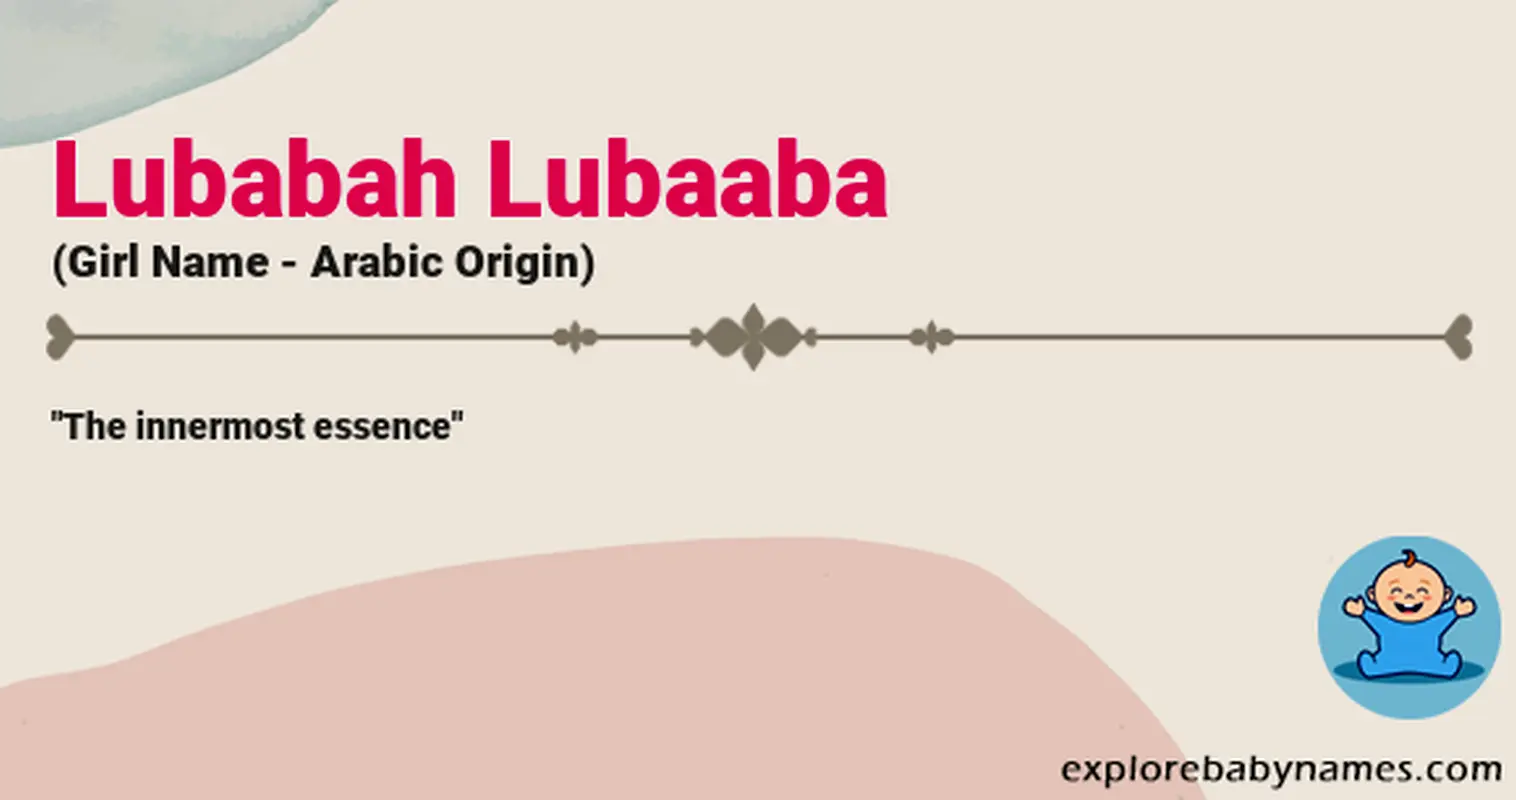 Meaning of Lubabah Lubaaba